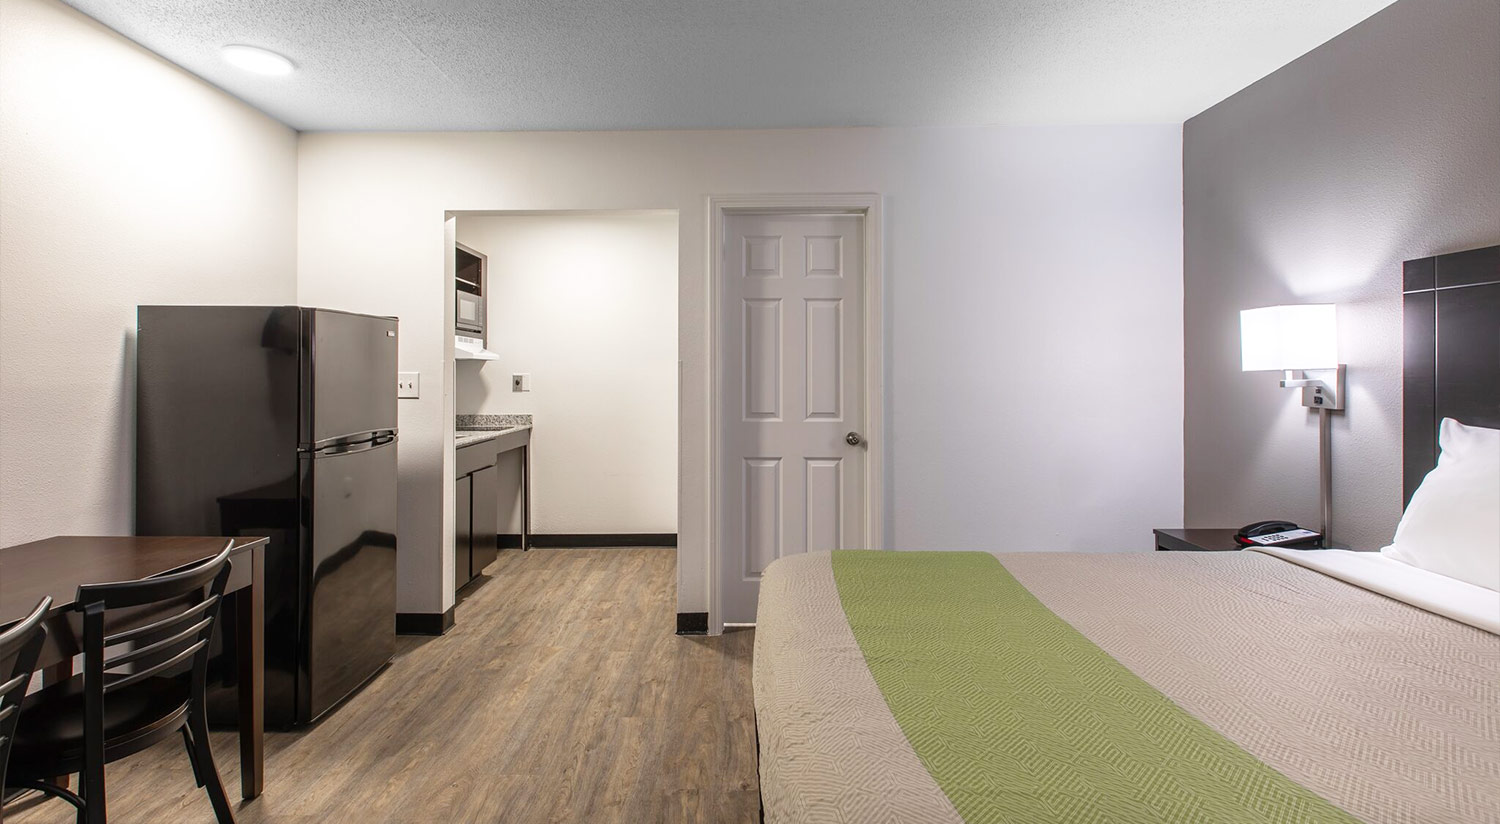  ENJOY SPACIOUS STUDIOS WITH FULLY-EQUIPPED KITCHENETTES AT THE STUDIO 6 GREENVILLE I-85 NEAR DOWNTOWN